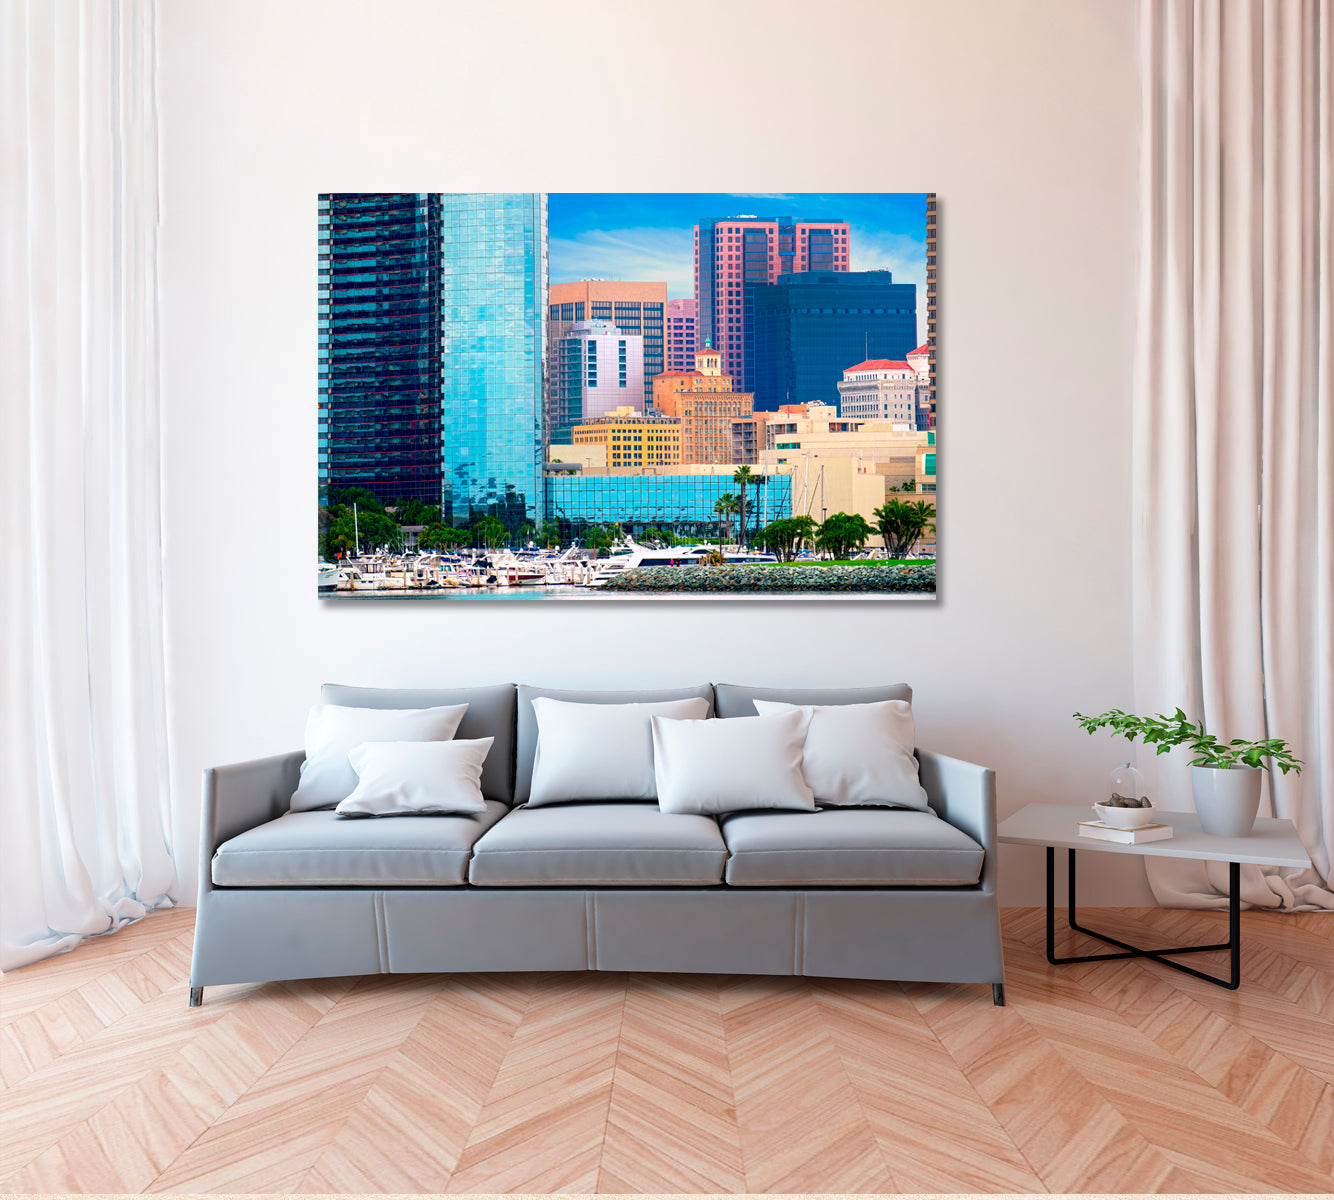 Downtown San Diego Cityscape Canvas Print ArtLexy 1 Panel 24"x16" inches 